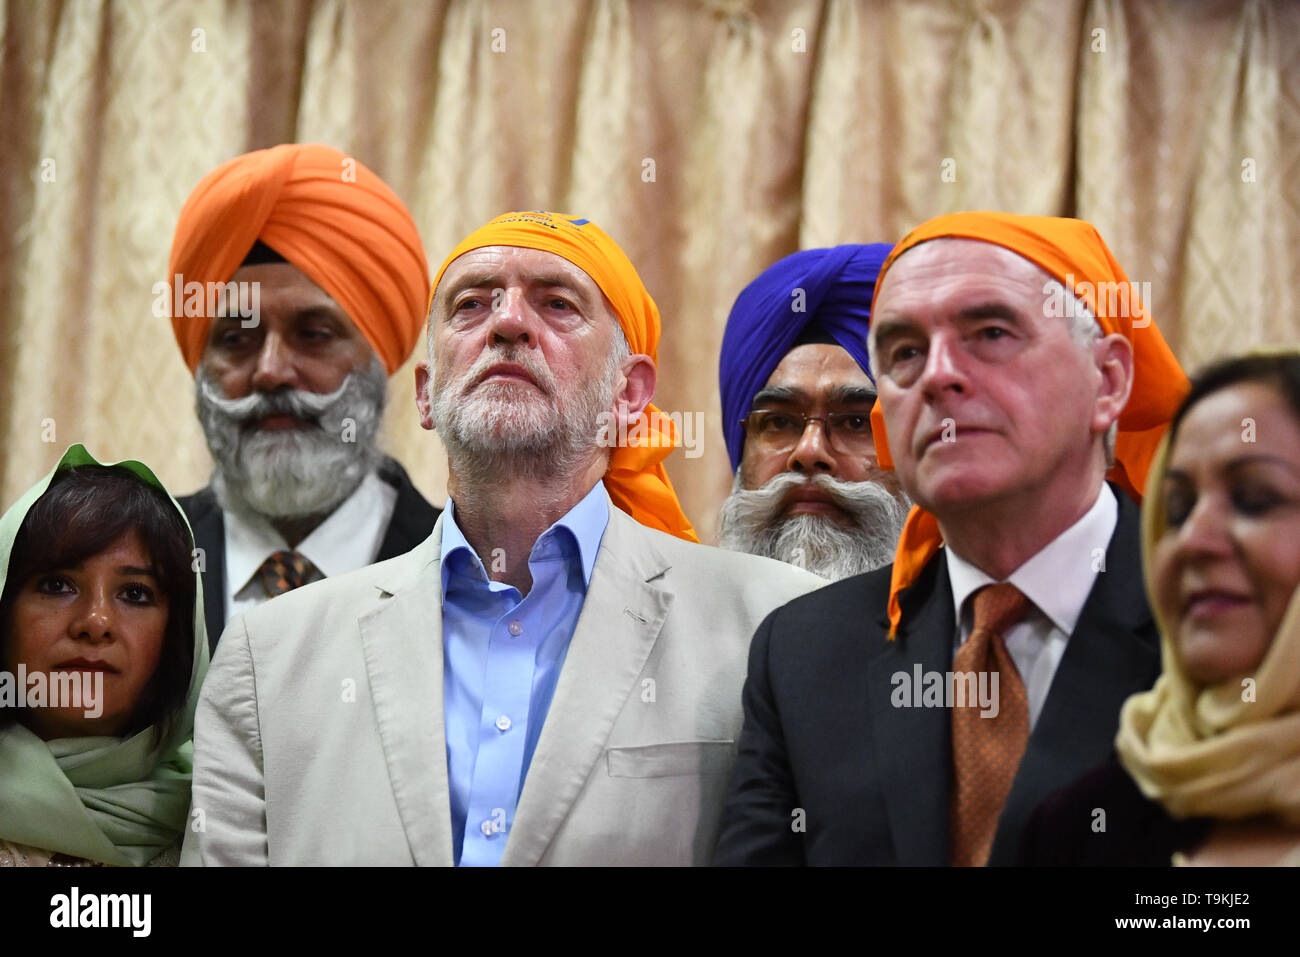 (left to right fron row) Laura Alvarez, Labour leader Jeremy Corbyn and Shadow Chancellor John McDonnell during a visit to Gurdwara Sri Guru Singh Sabha in Southall. Stock Photo